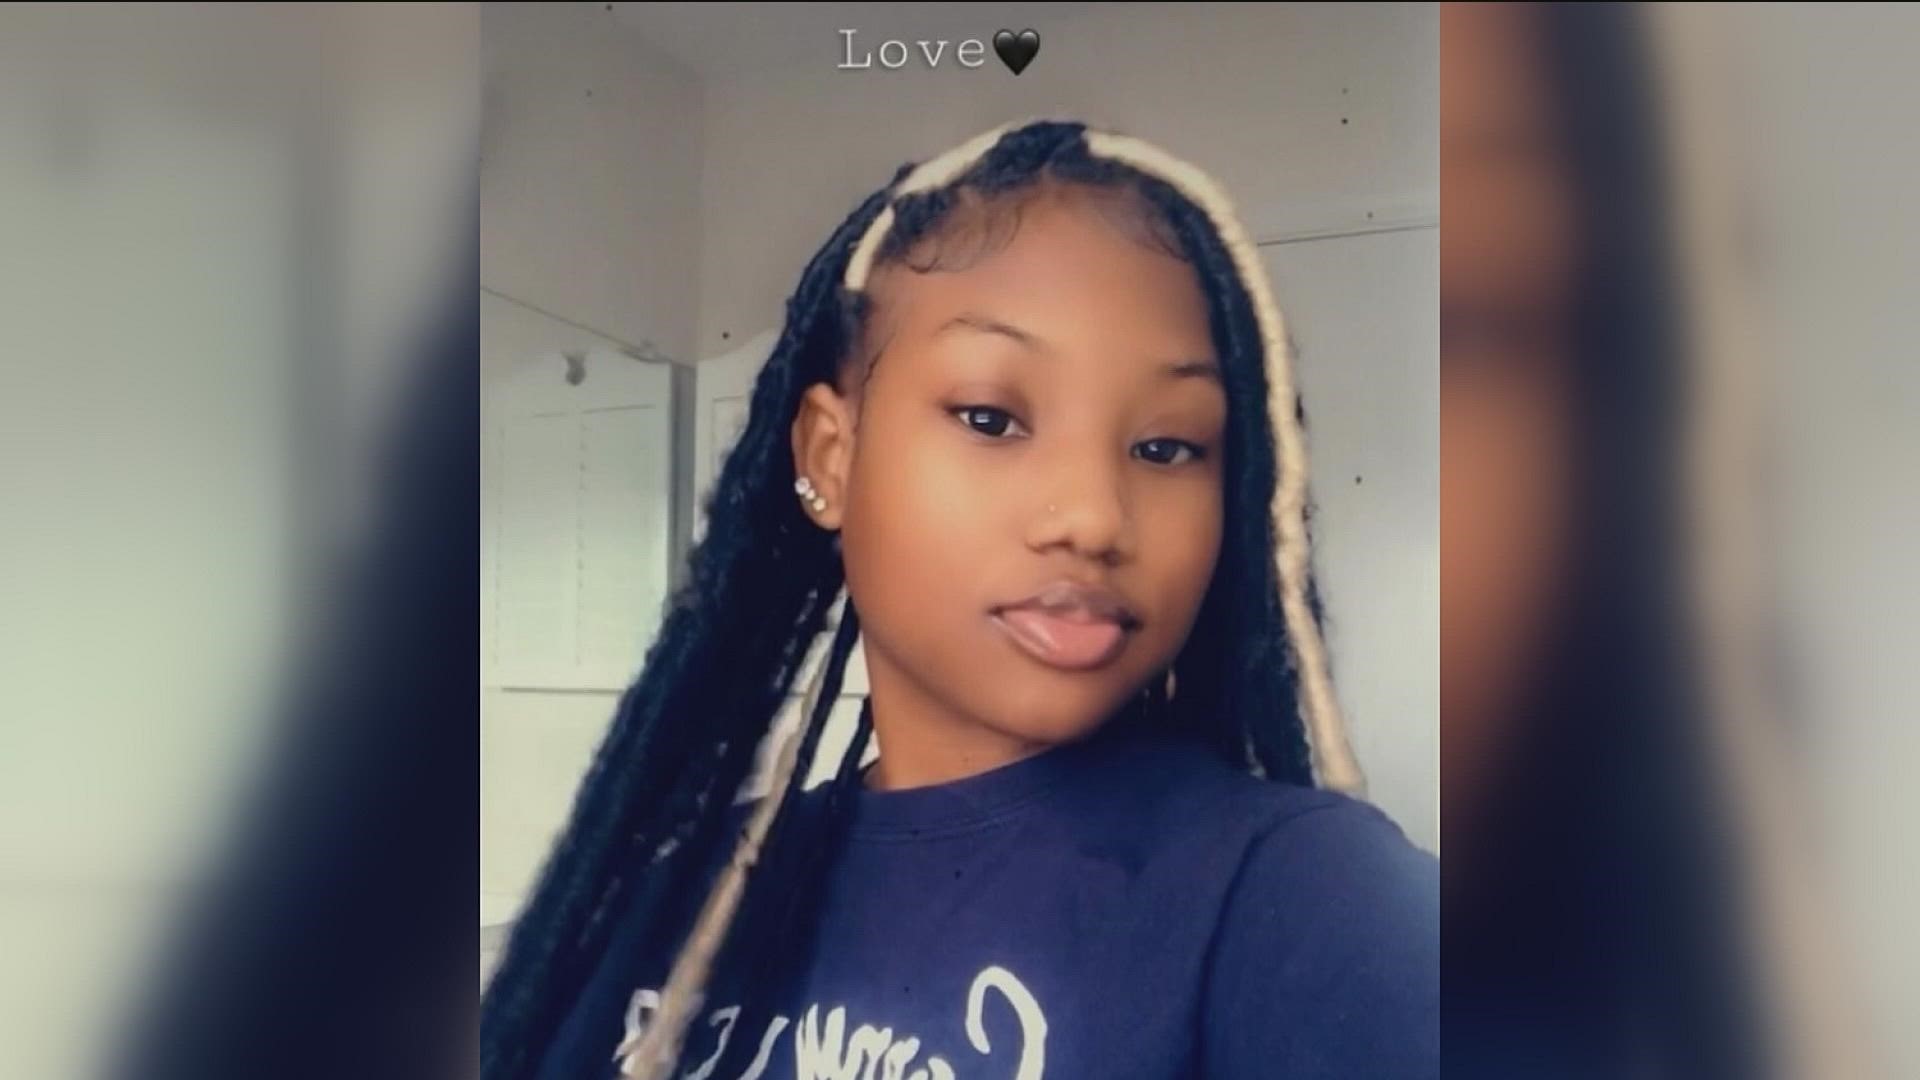 Family identified her as a 16-year-old student at South Gwinnett High School.